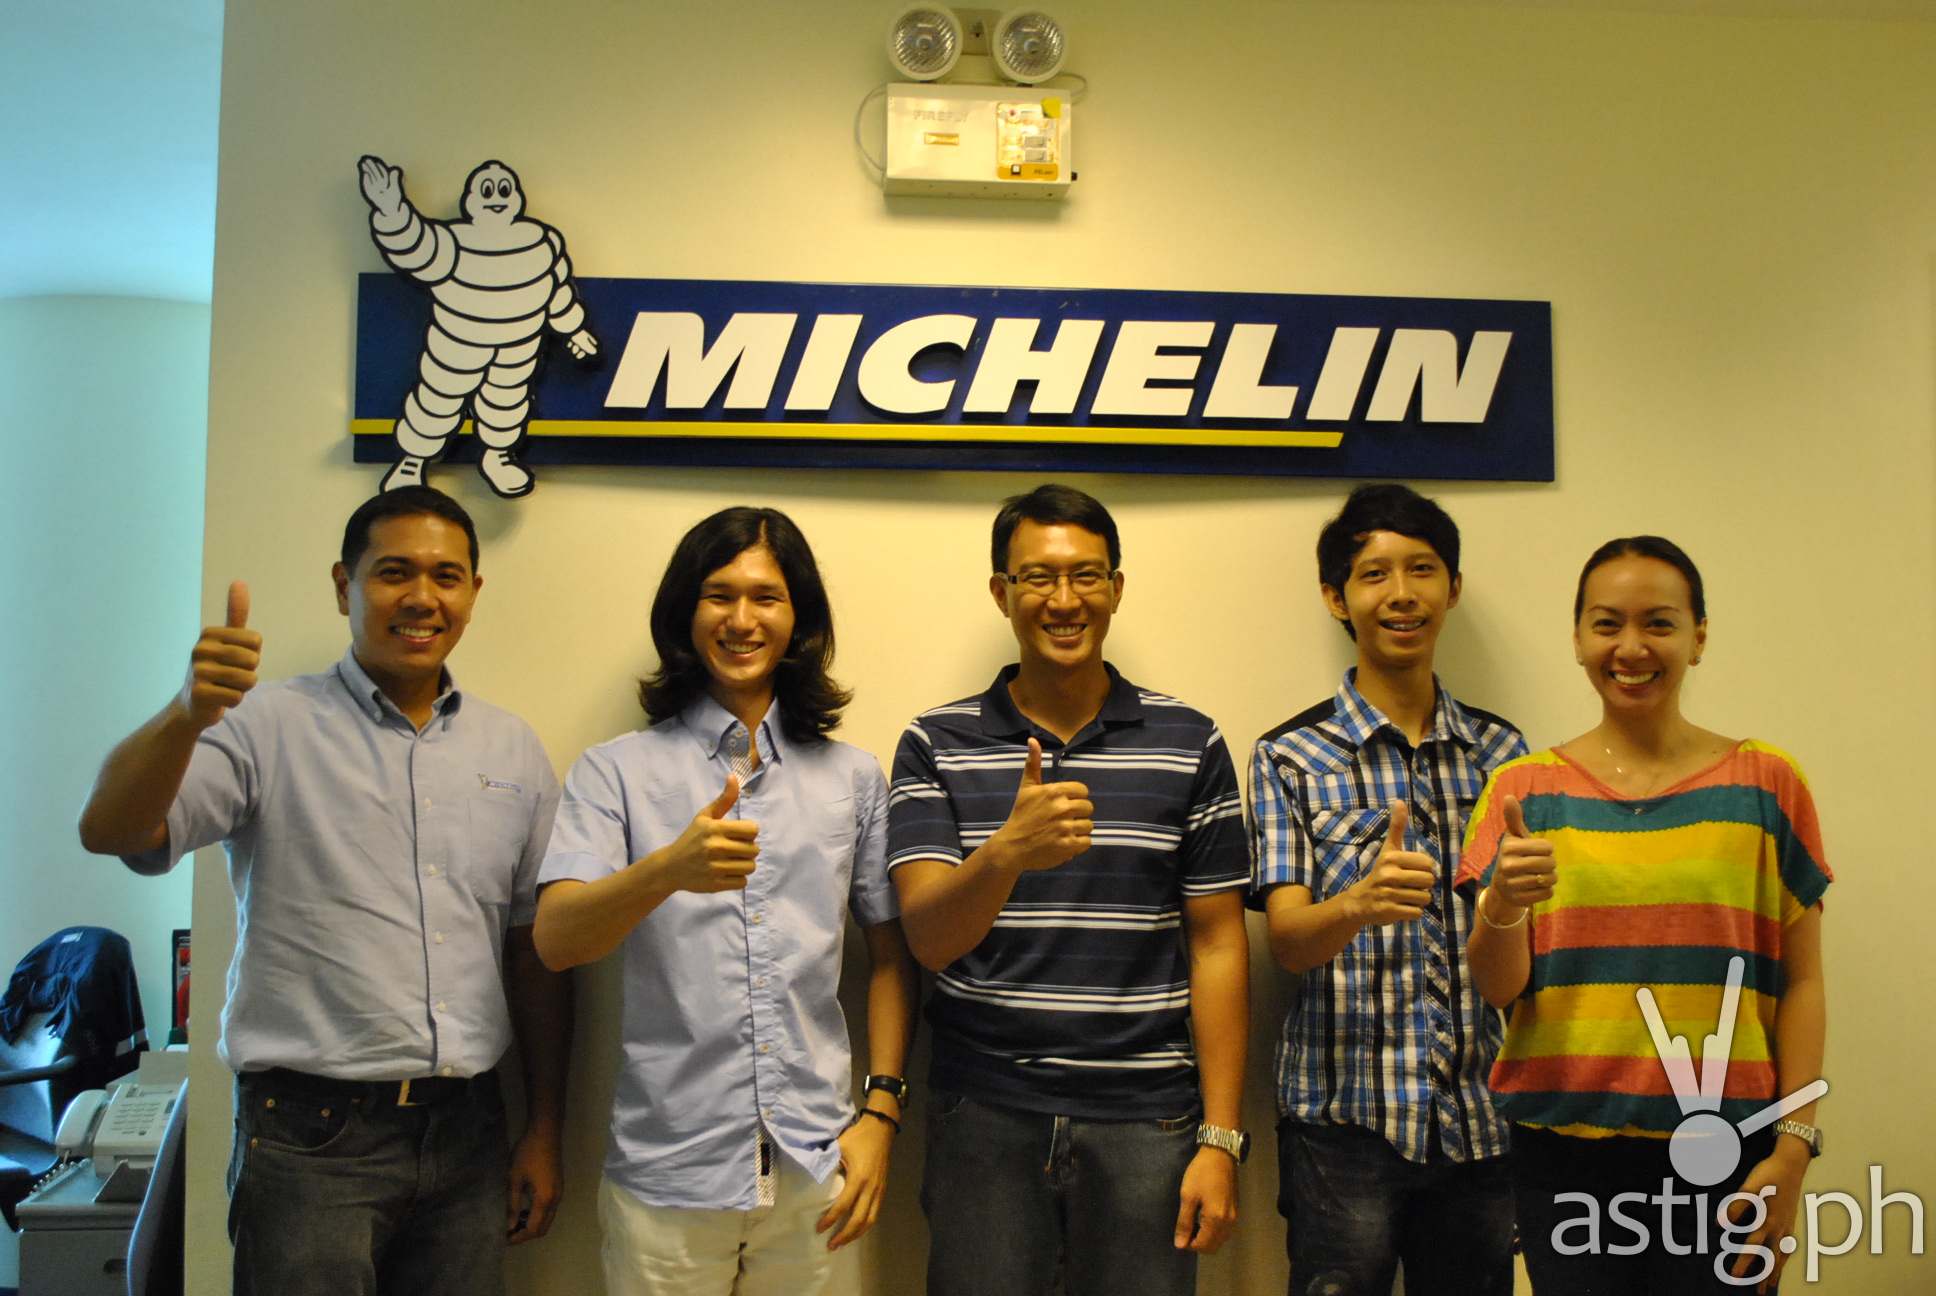 MICHELIN Philippines, composed of its Chief Representative Mike Nunag (L) and MarketingCommunications Manager Caroline Del Rosario (R), congratulate the winners of the MICHELIN Right2Race Game, namely Sung Joon Park, Ivan Isada and